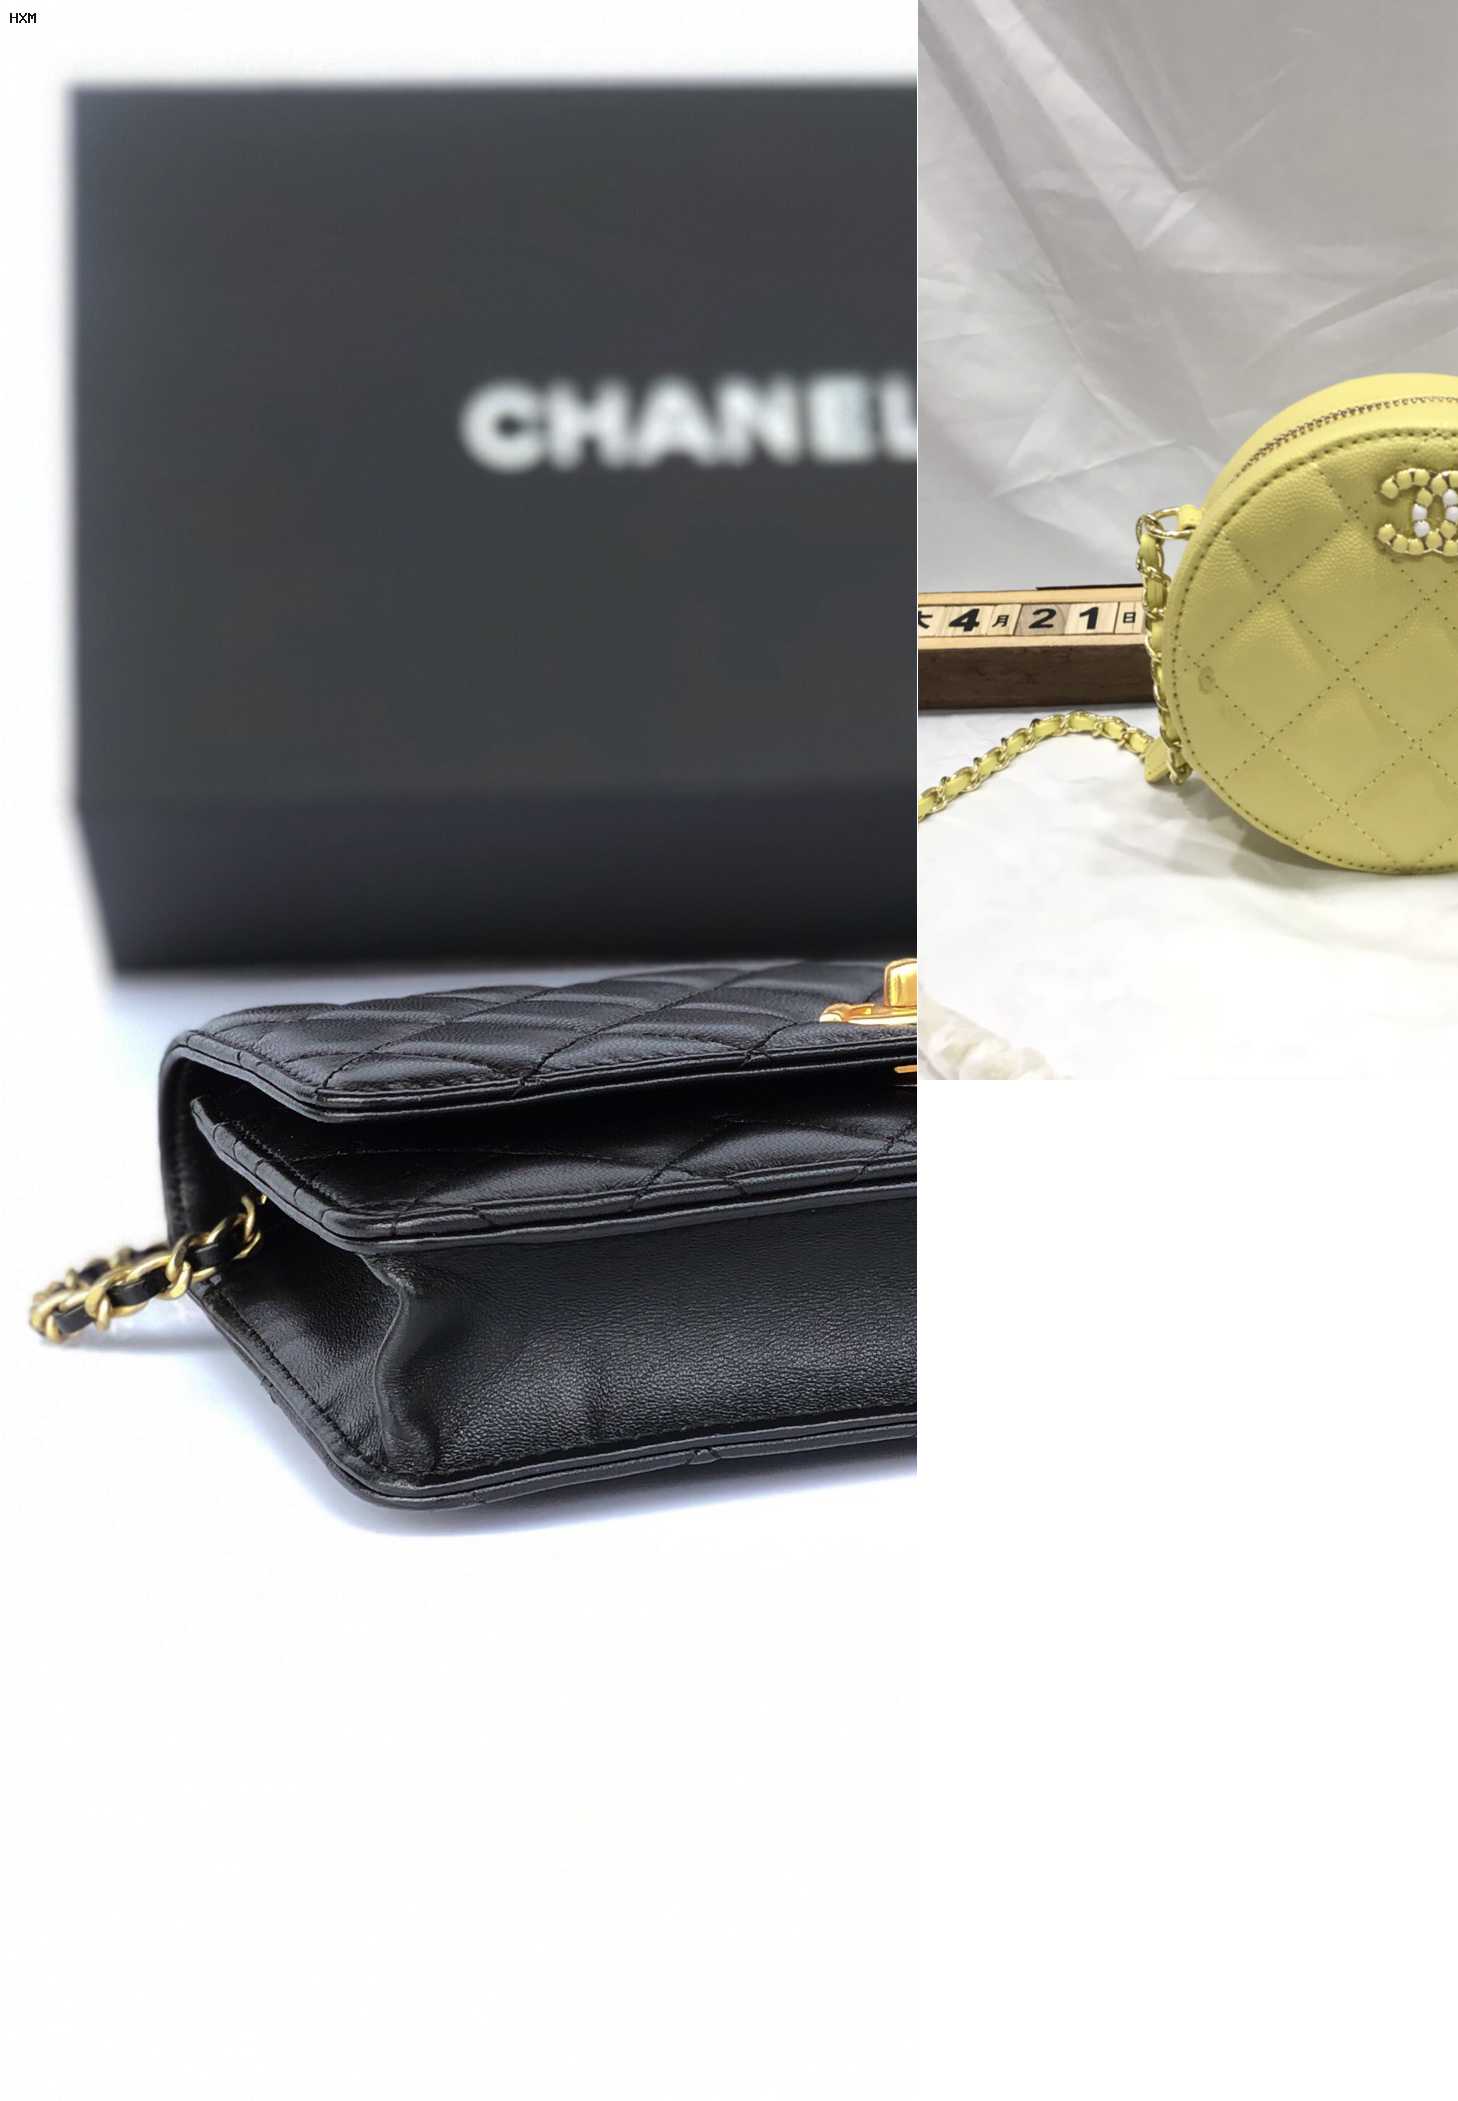 chanel le havre